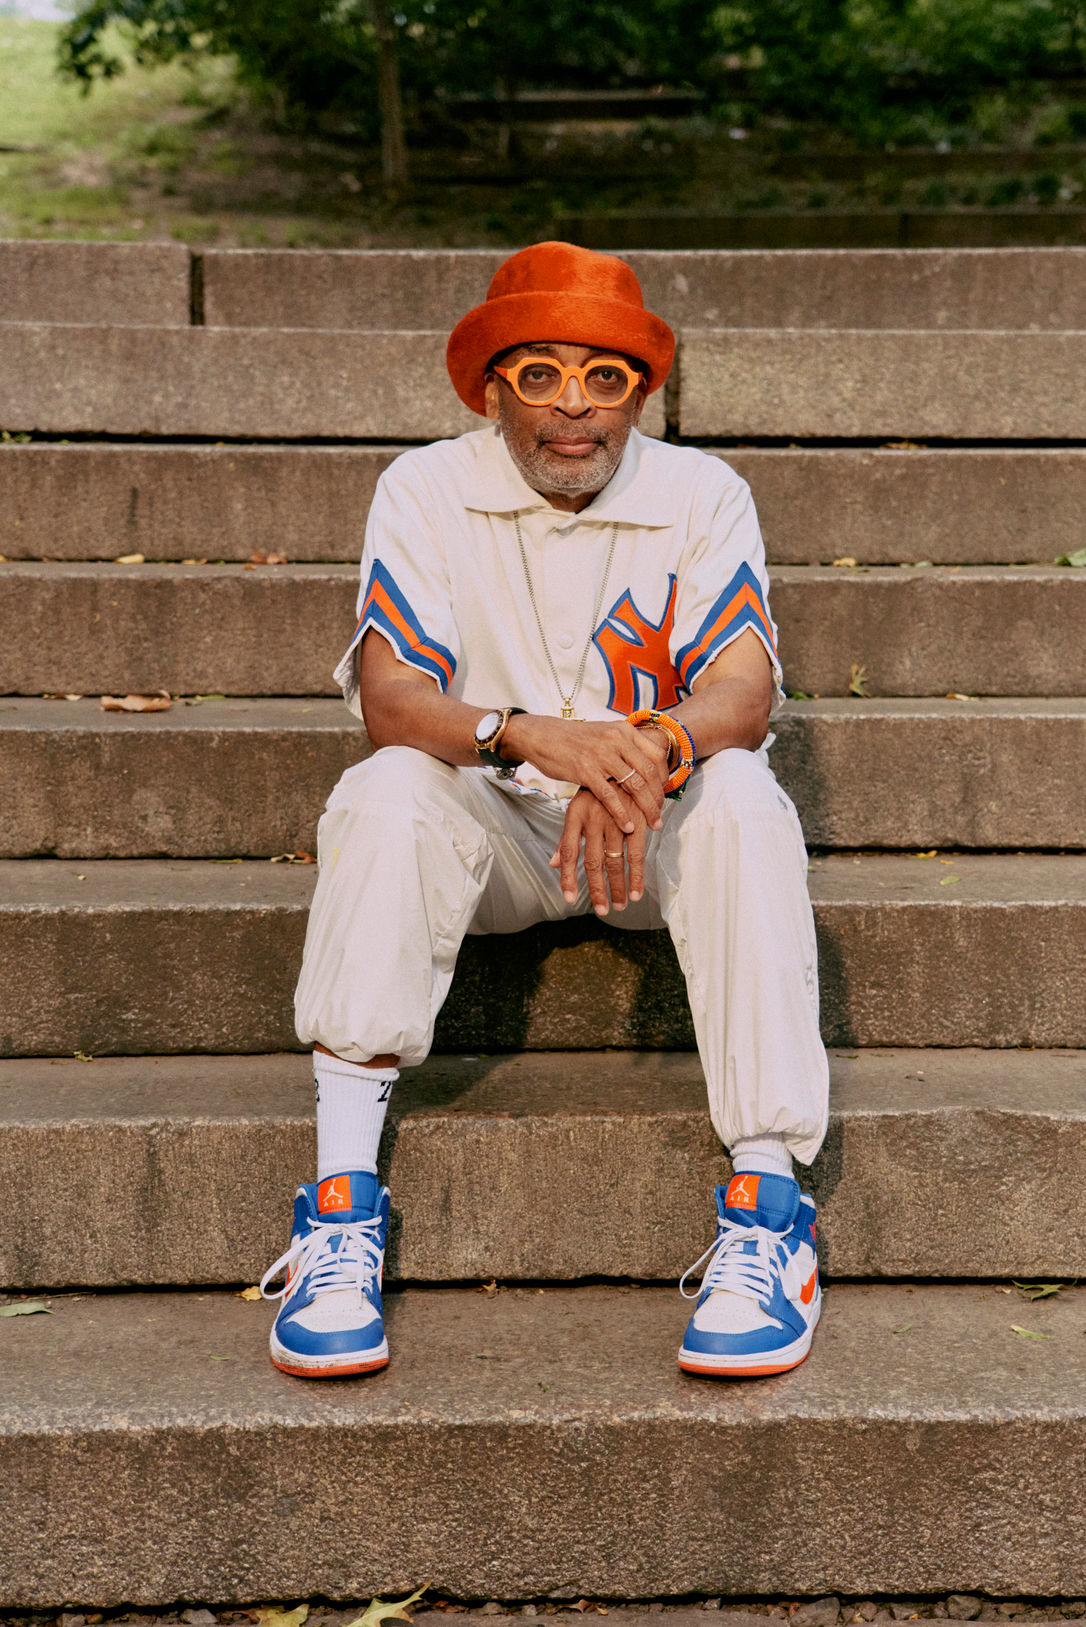 Spike Lee: Diversity issue 'goes further than the Academy Awards